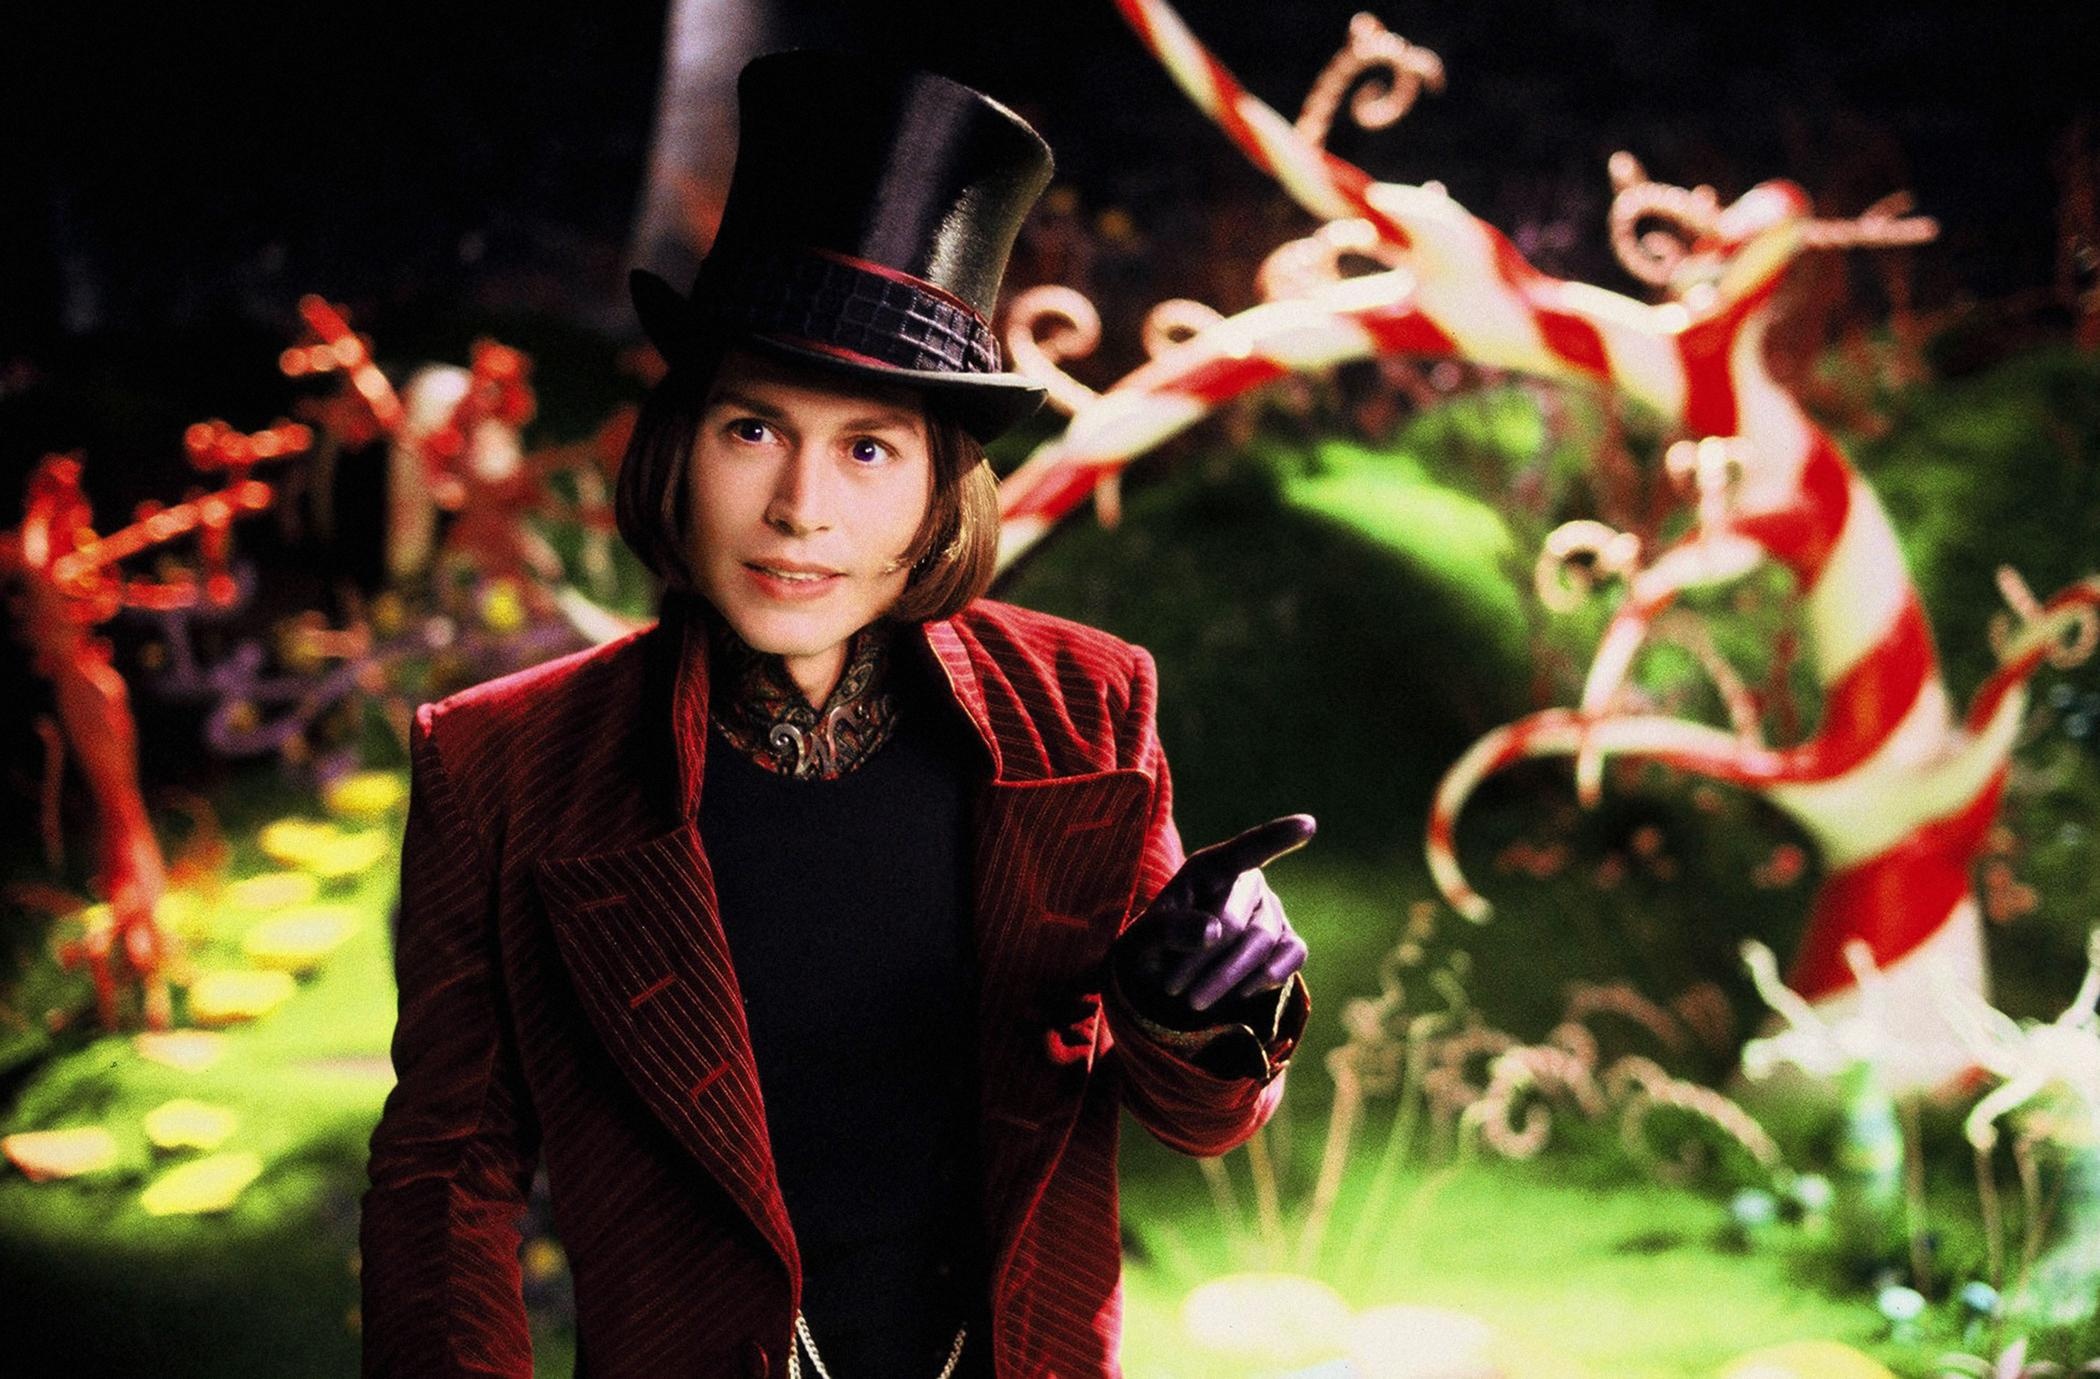 Willy Wonka, Free wallpapers, Willy Wonka backgrounds, Images, 2100x1380 HD Desktop